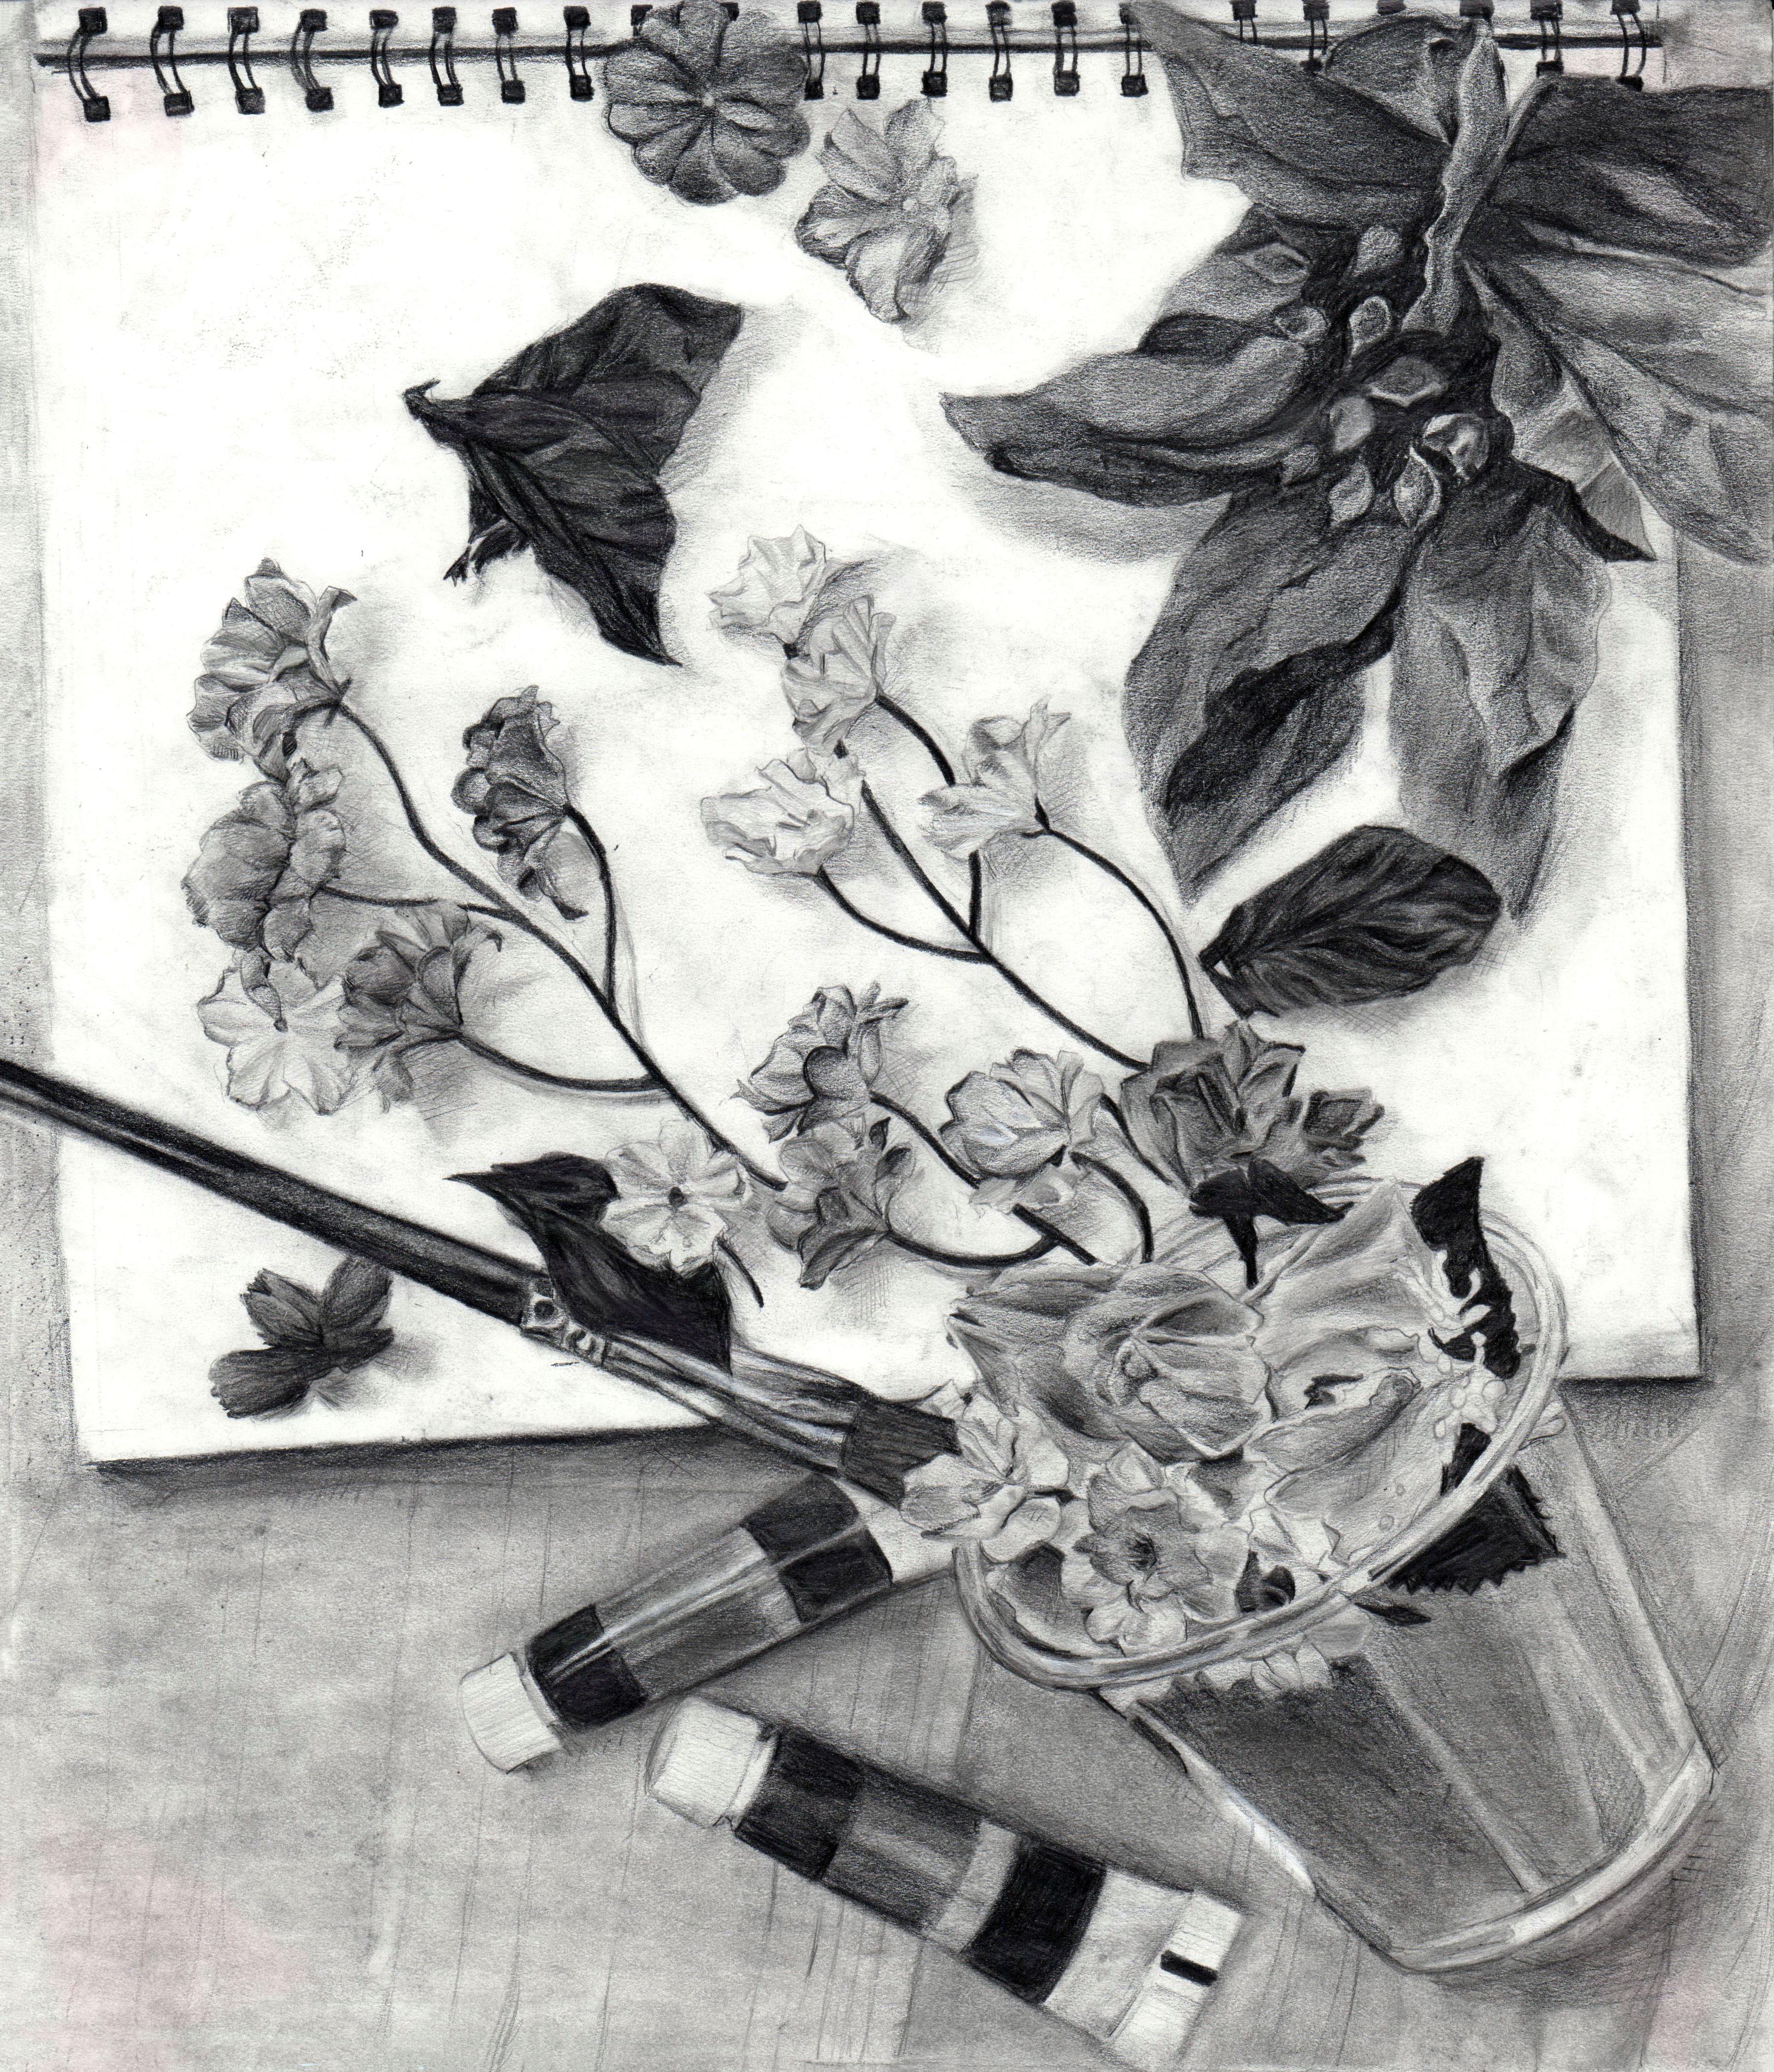 Black-and-white pencil drawing of a spilled transparent cup resting atop an opened blank page of a spiral-bound sketchbook, seen from overhead. Several flowers emerge from the cup onto the white page of the book. Some leaves and dried flowers sit on the page above the cup, and a long, dark paintbrush crosses the lower third of the page. A pair of small sealed paint tubes rest at odd angles on the tabletop, just below the sketchbook page.